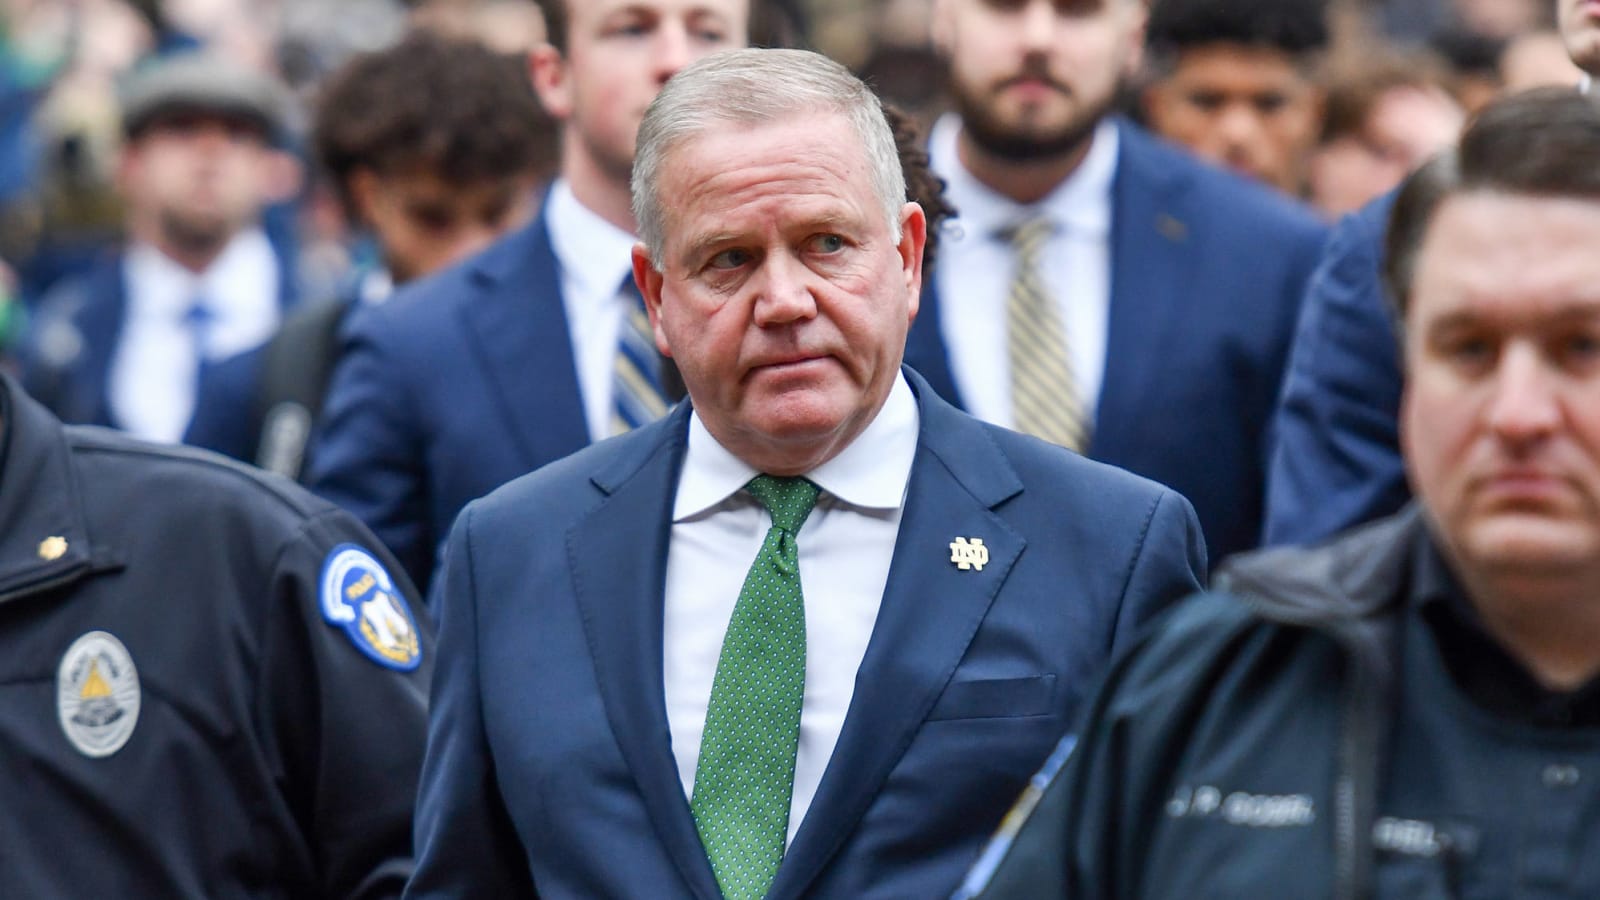 Brian Kelly changes Twitter bio before LSU announcement